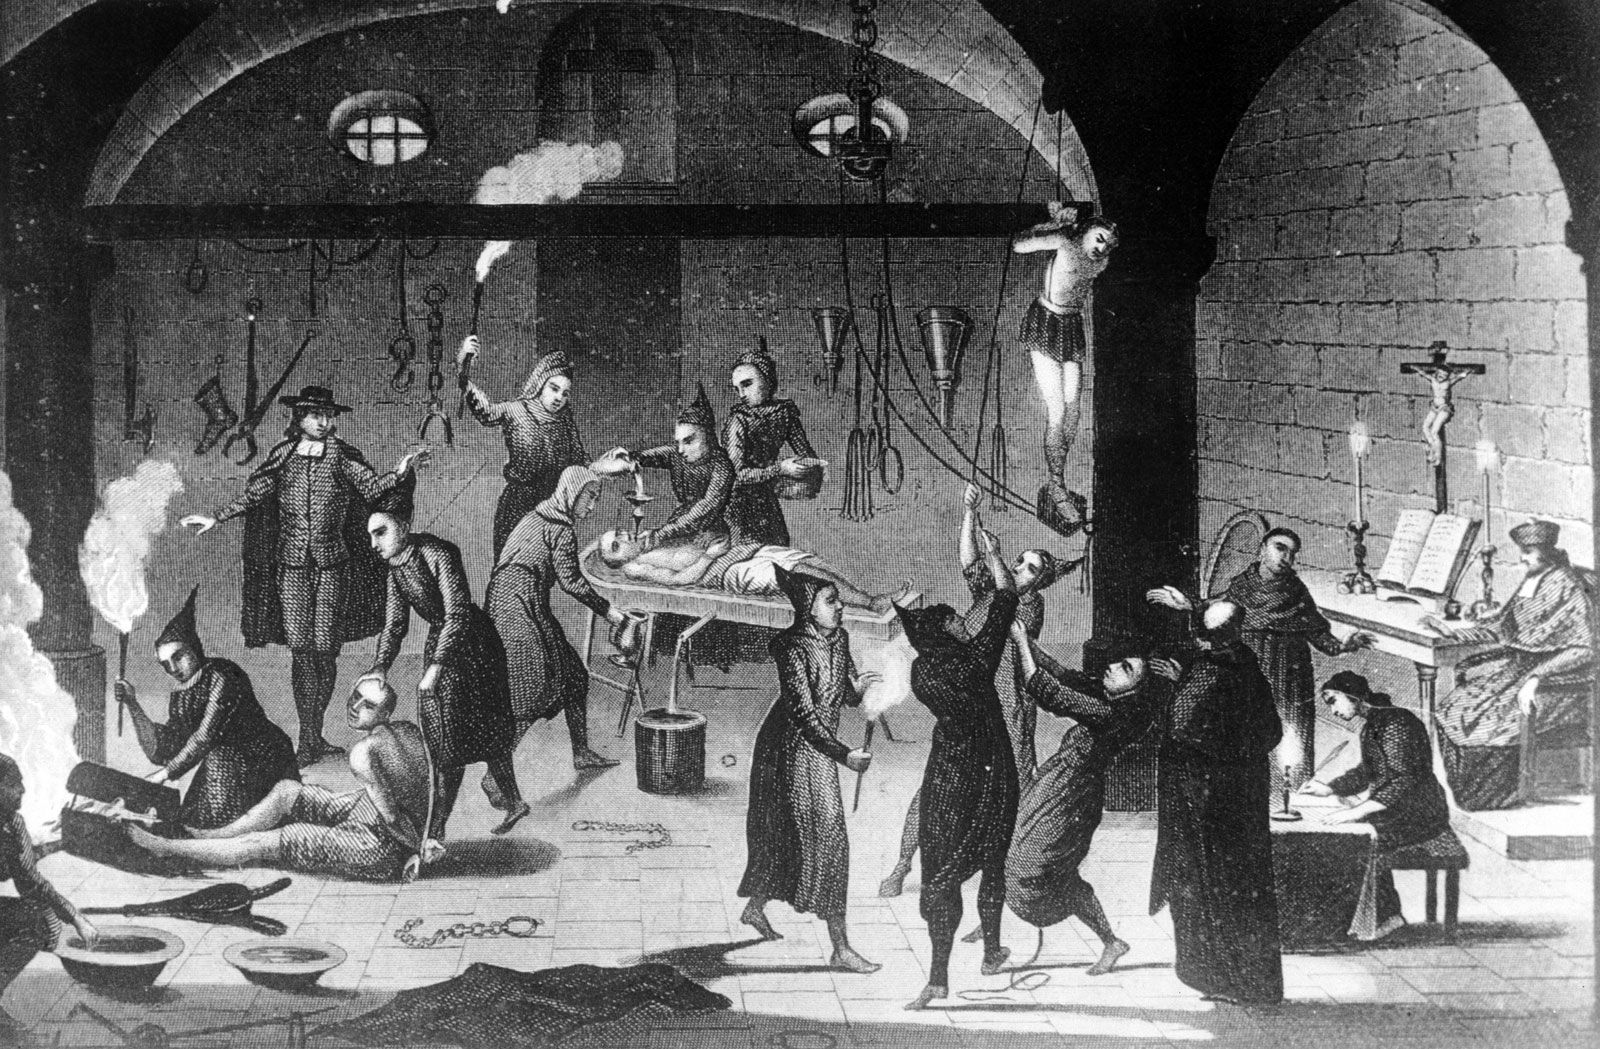 Suspected Protestants being tortured as heretics during the Spanish Inquisition